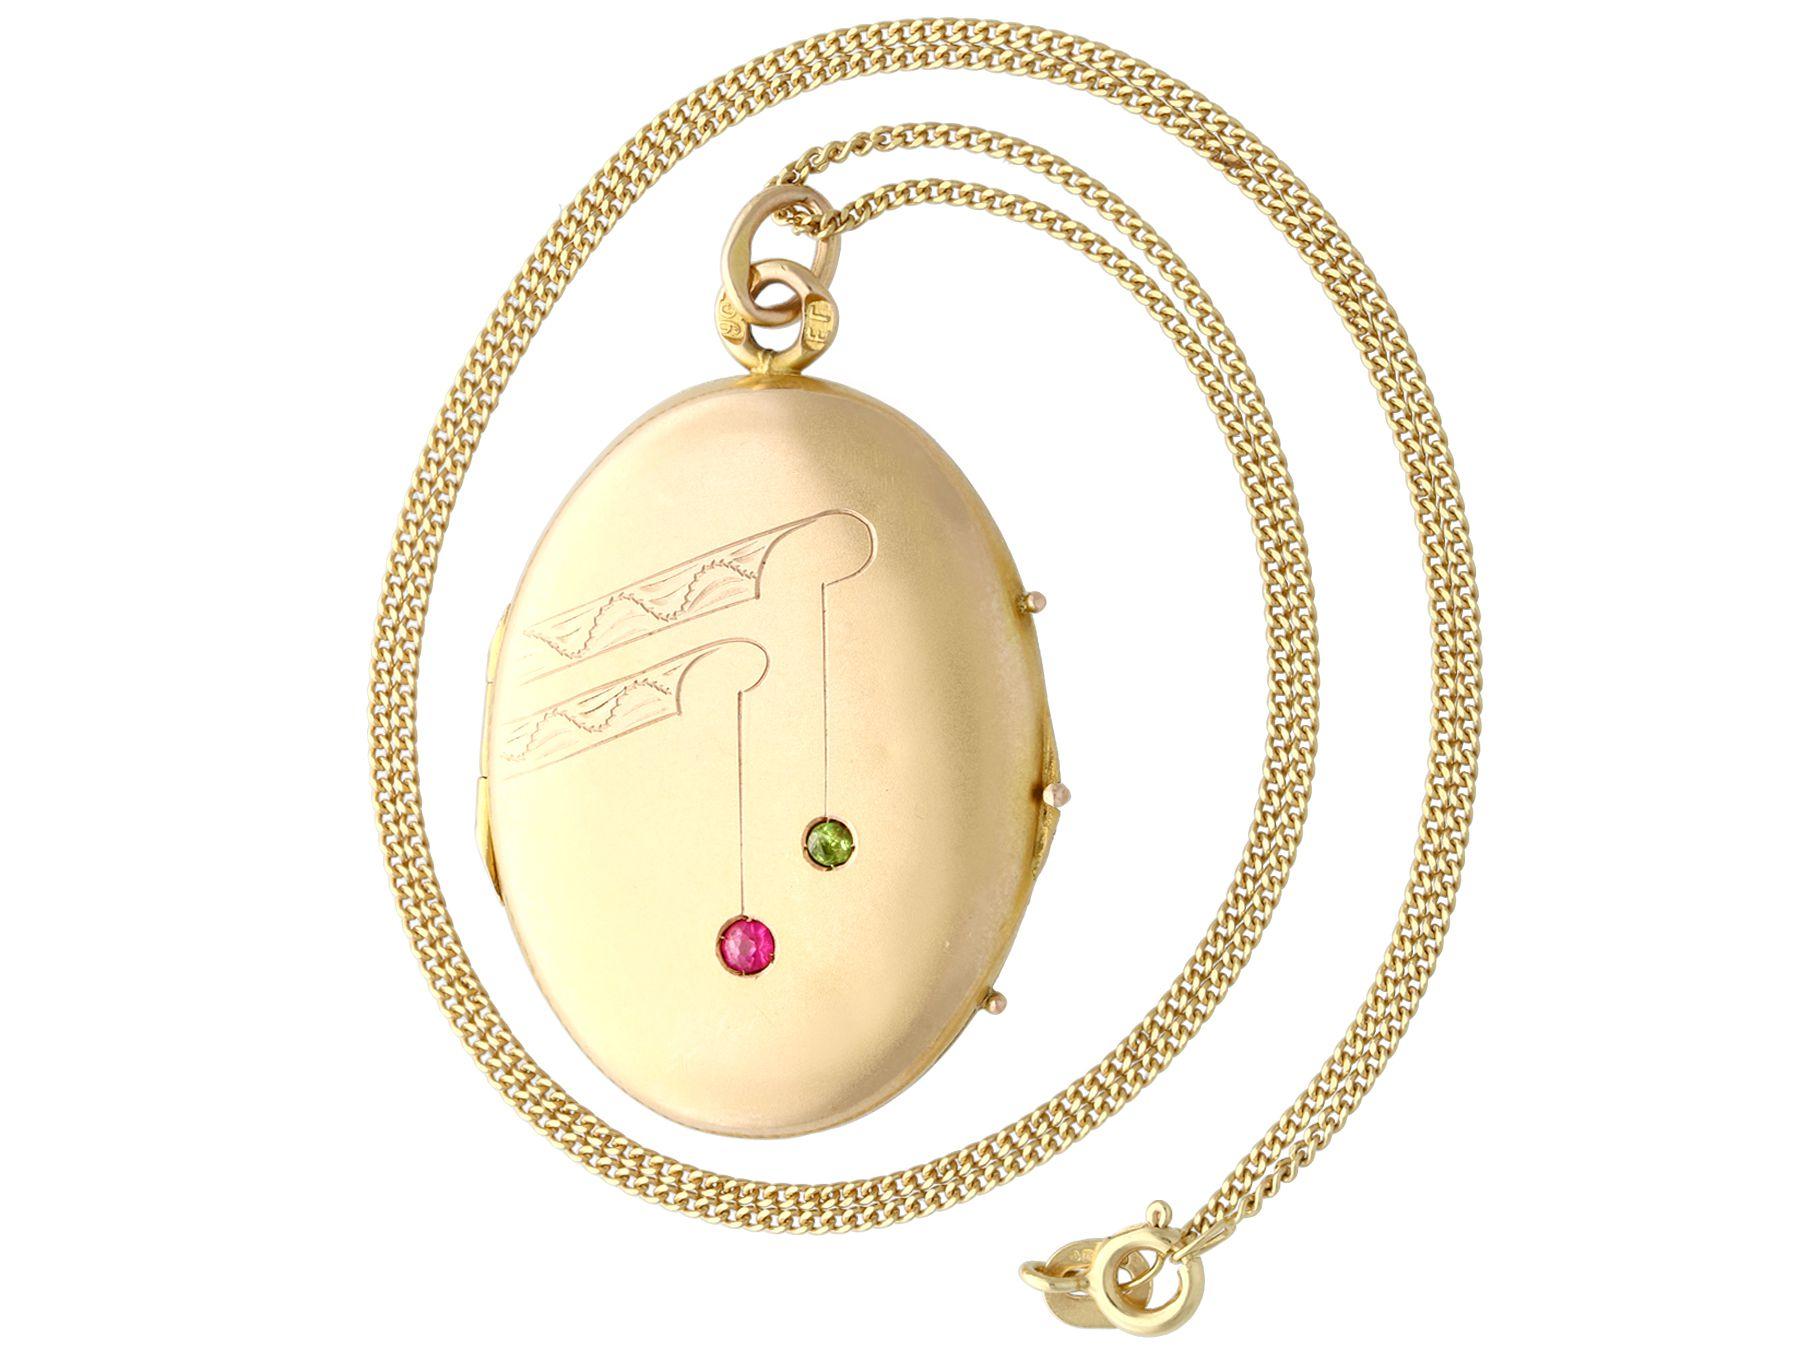 A fine and impressive antique Russian 0.10 carat ruby and 0.06 carat peridot, 14 karat yellow gold locket; part of our diverse antique estate jewelry collections.

This fine and impressive antique locket has been crafted in 14k yellow gold.

The